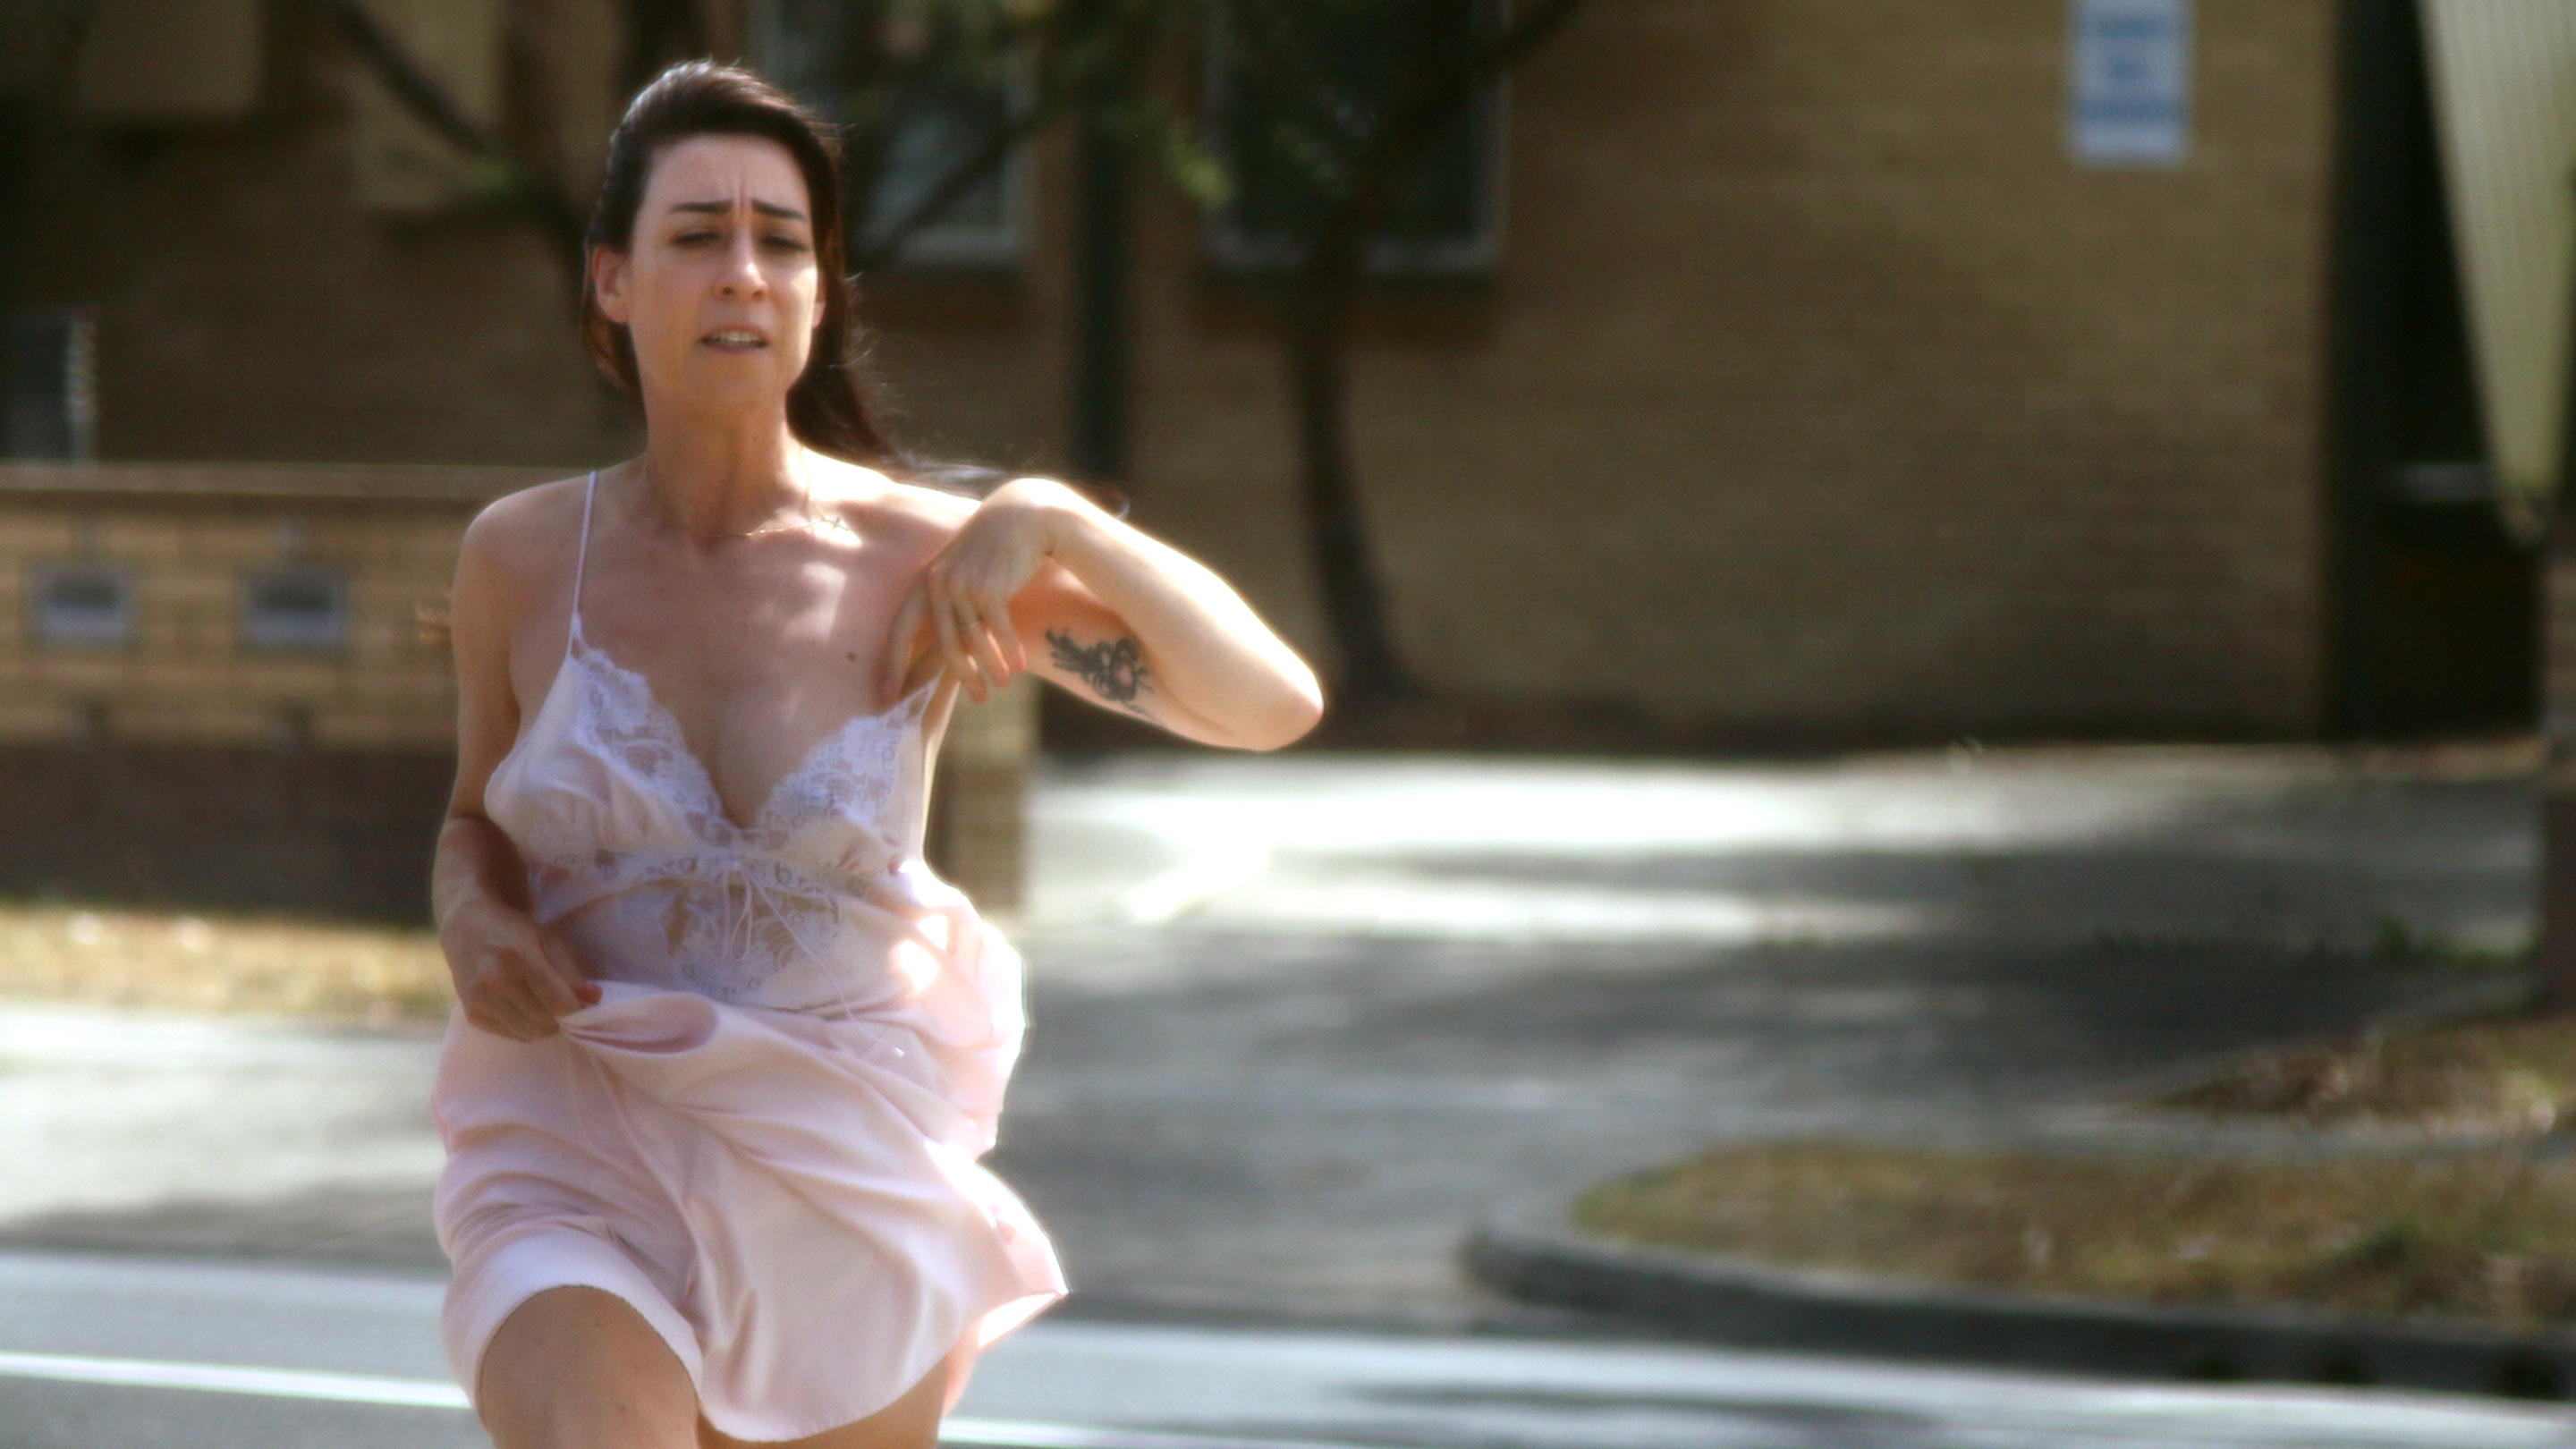 Sarah Mary Chadwick runs down a suburban street in a night dress in the daytime